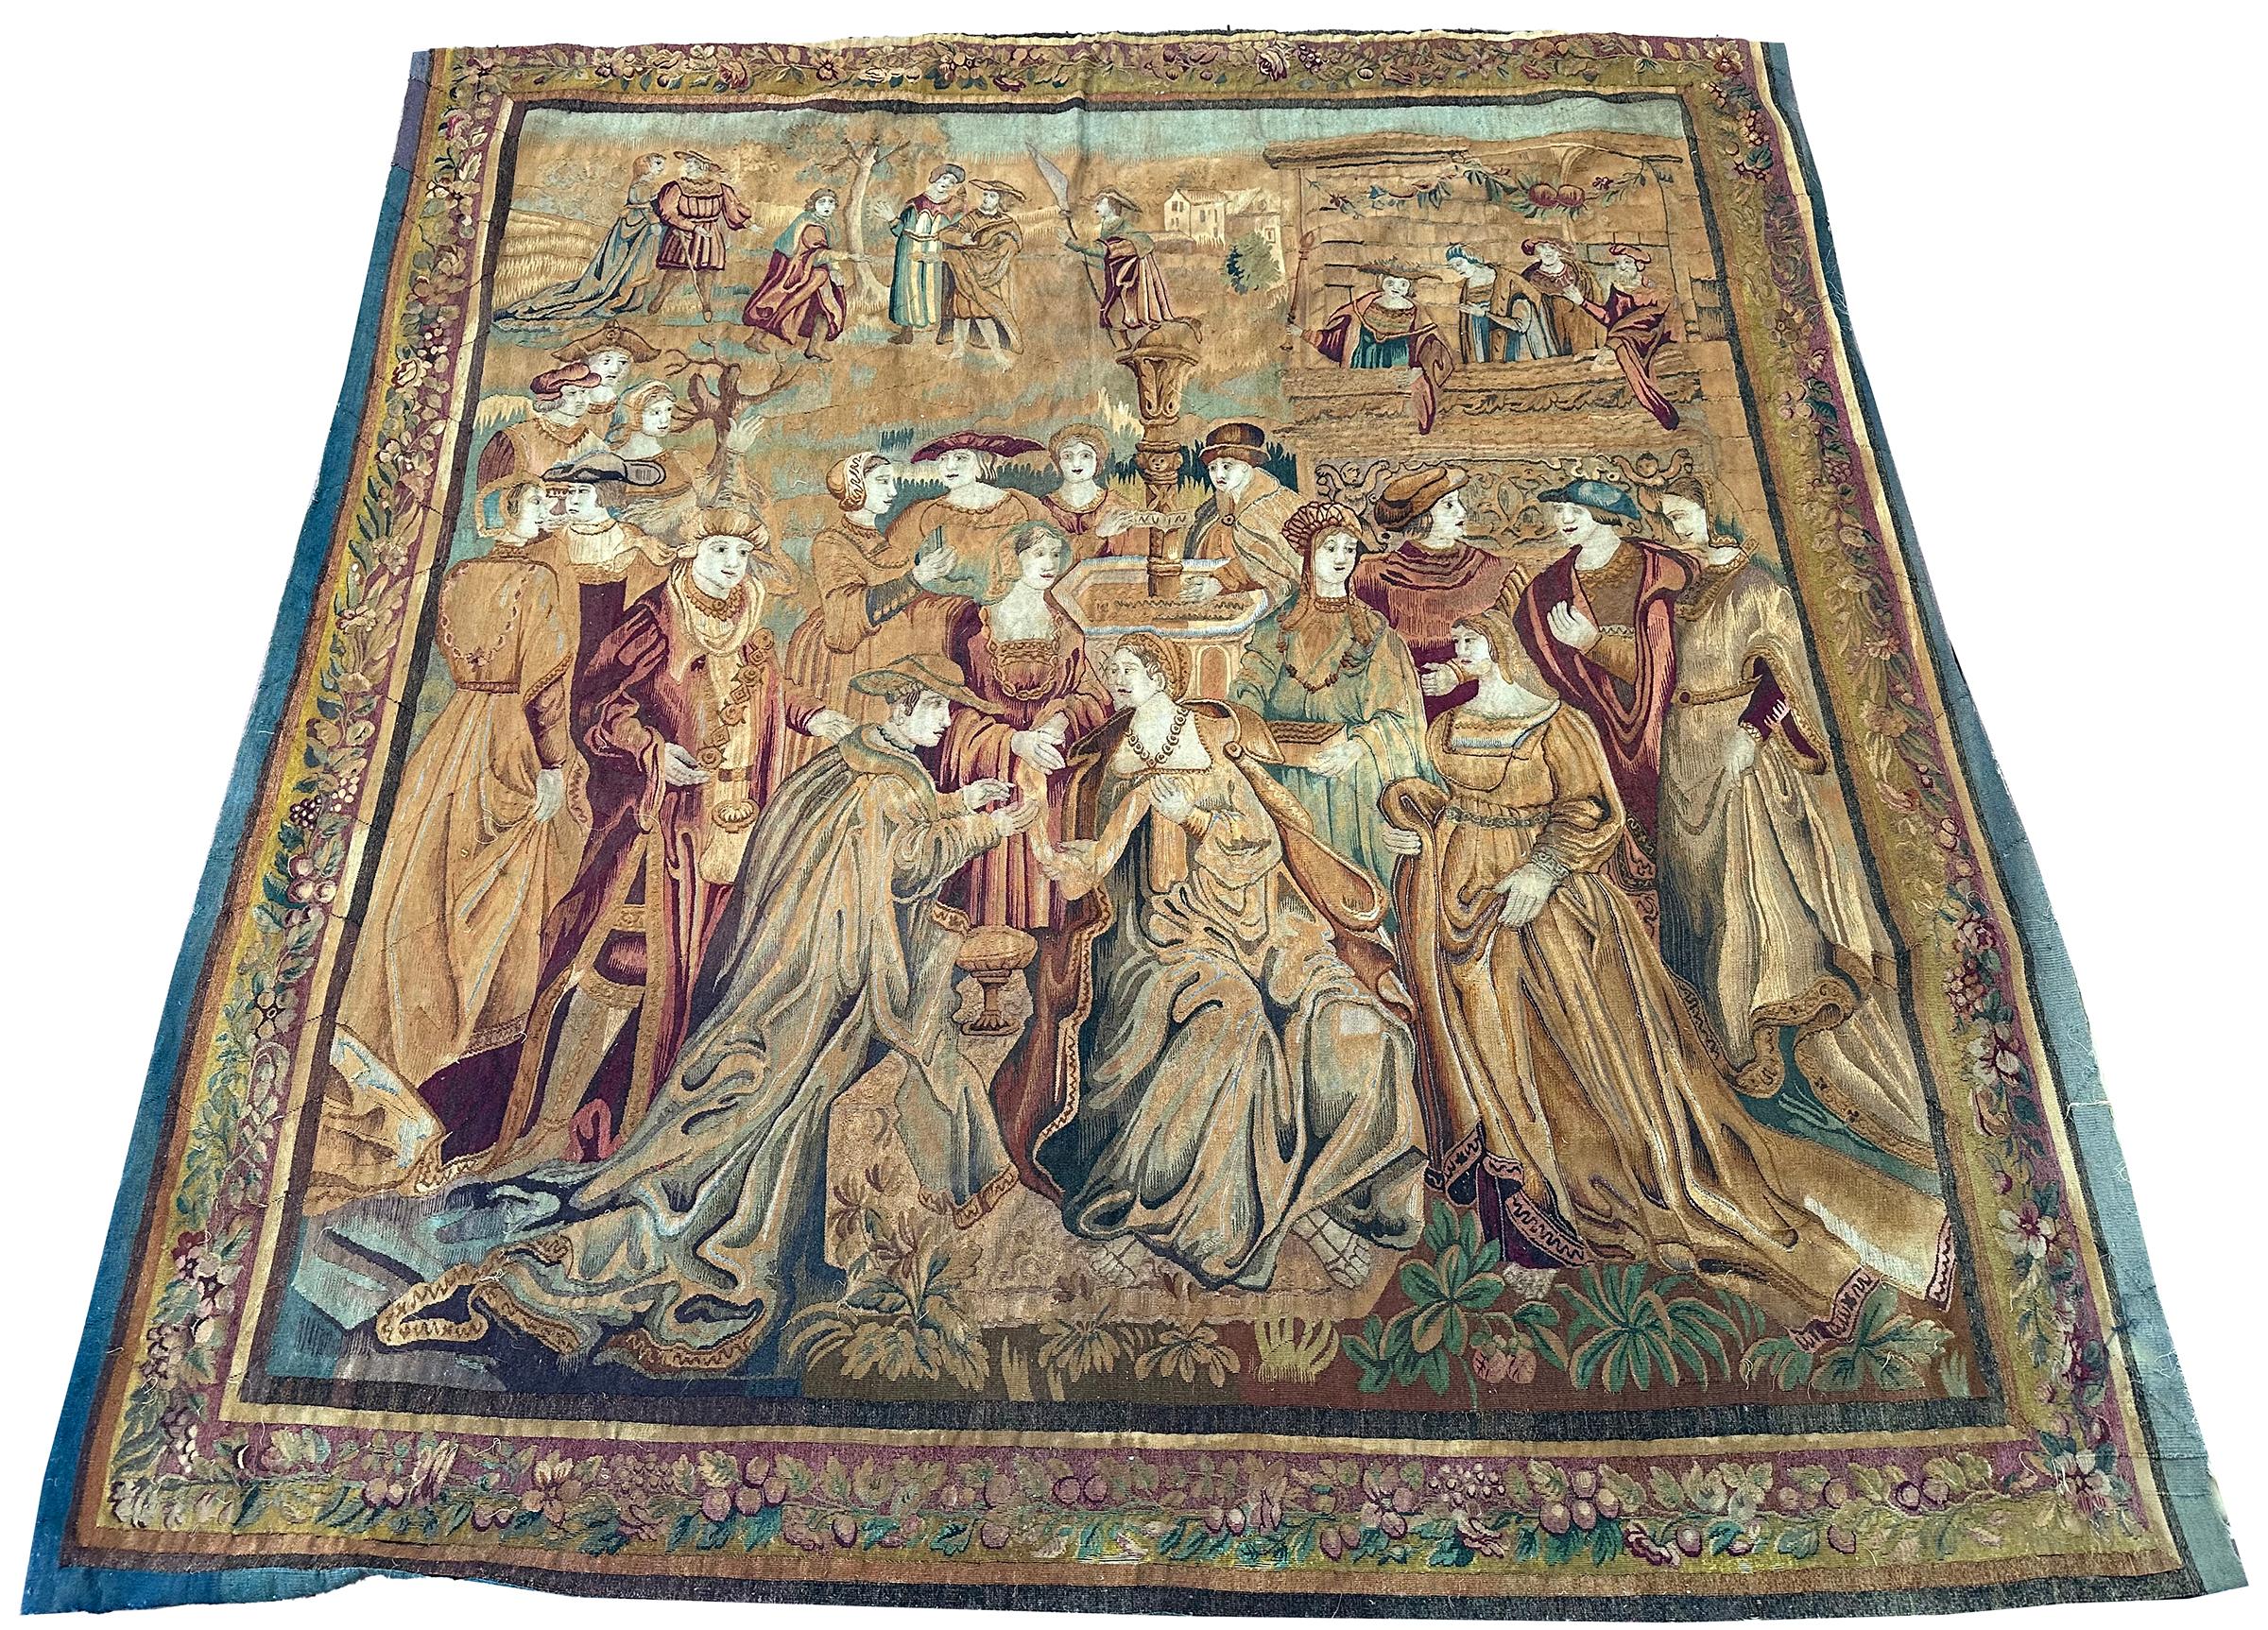 1890 Antique French Tapestry Arts & Crafts Ceremonial 8x9
7'10